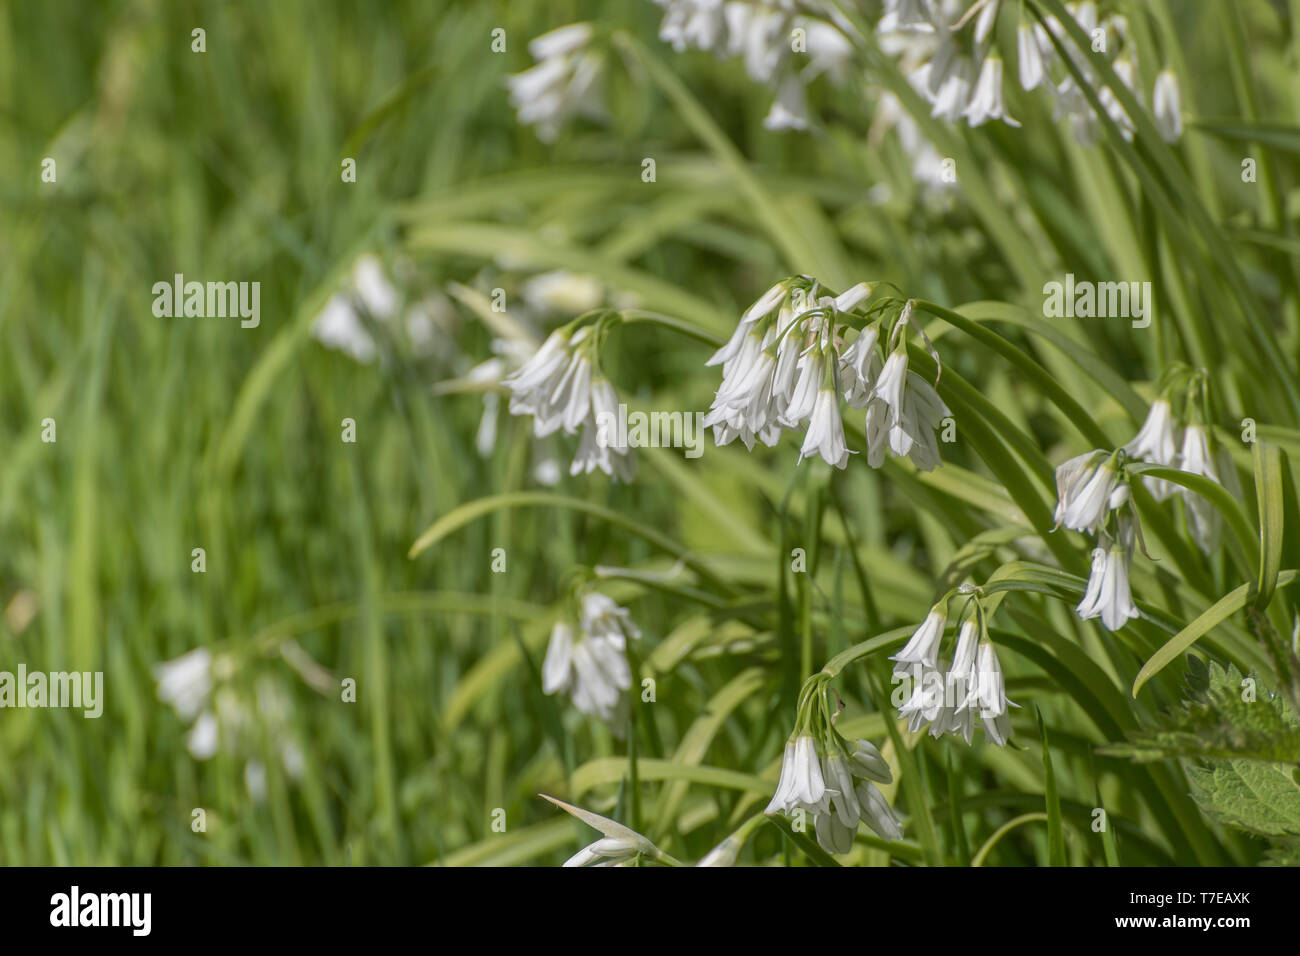 Foliage and white flowers of Three-cornered Leek / Allium triquetrum, a wild member of the Onion family which may be used a foraged food and eaten. Stock Photo